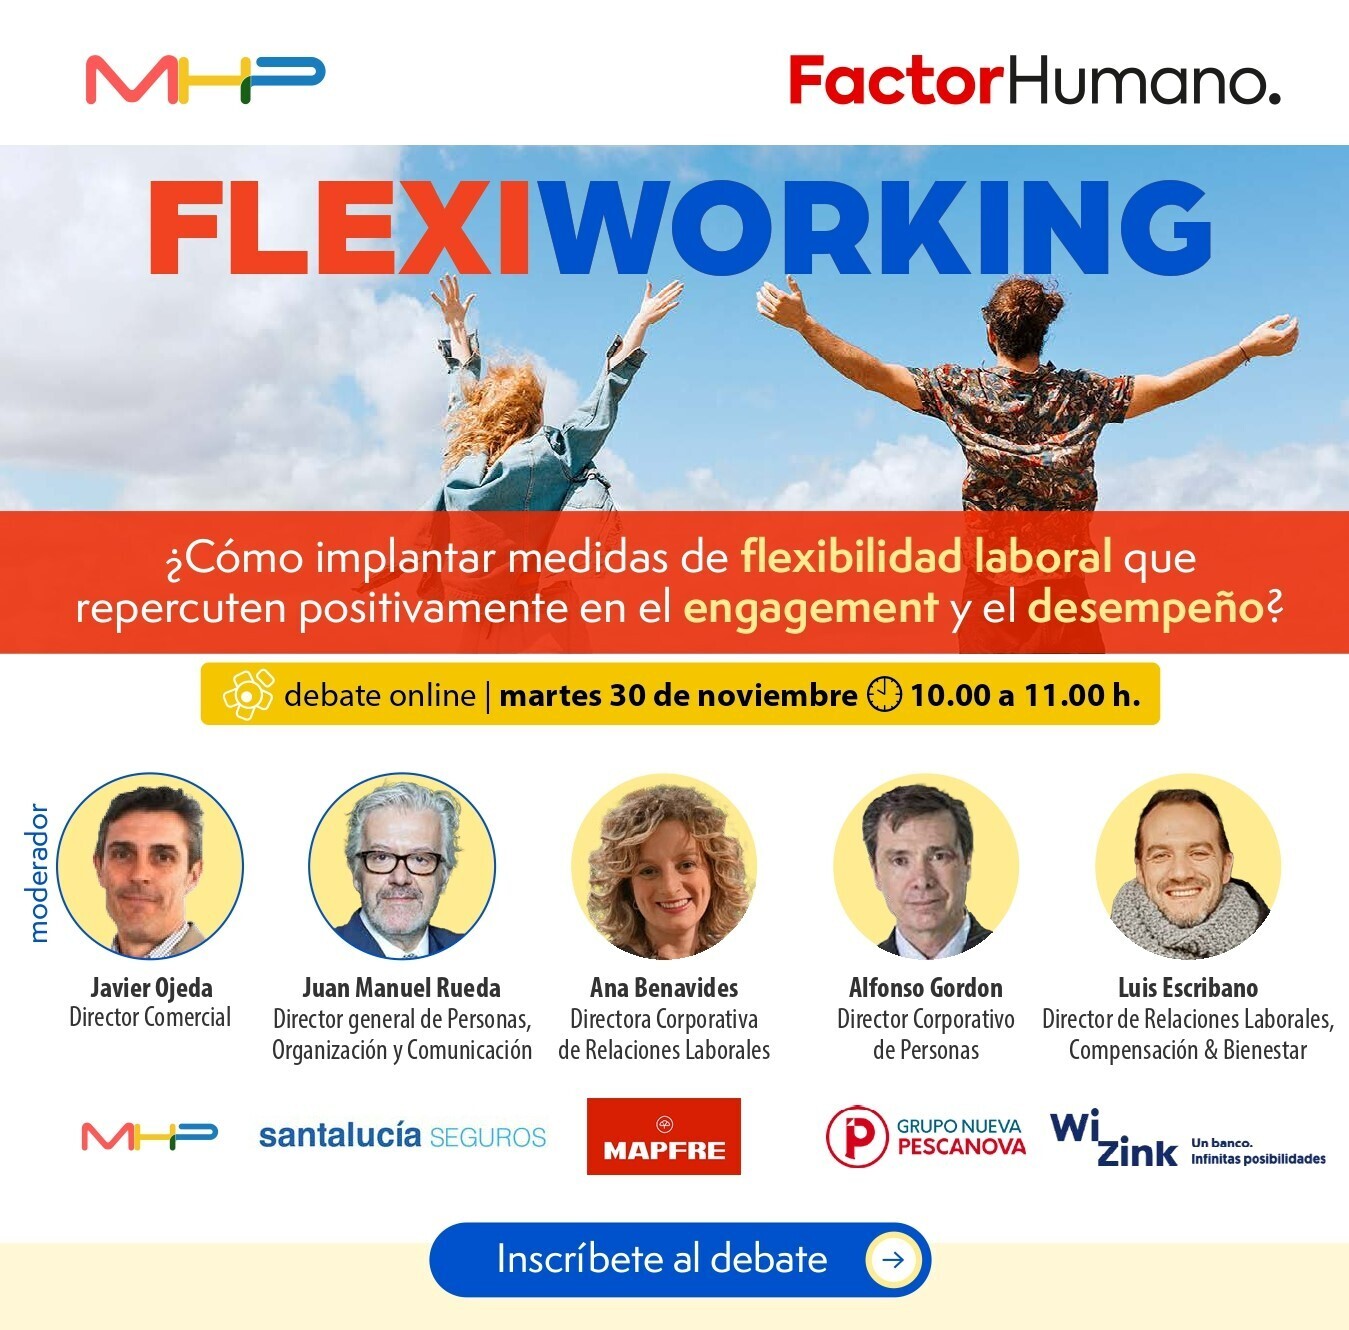 mailing-MHP-Y-FH-flexiworking_page-0001